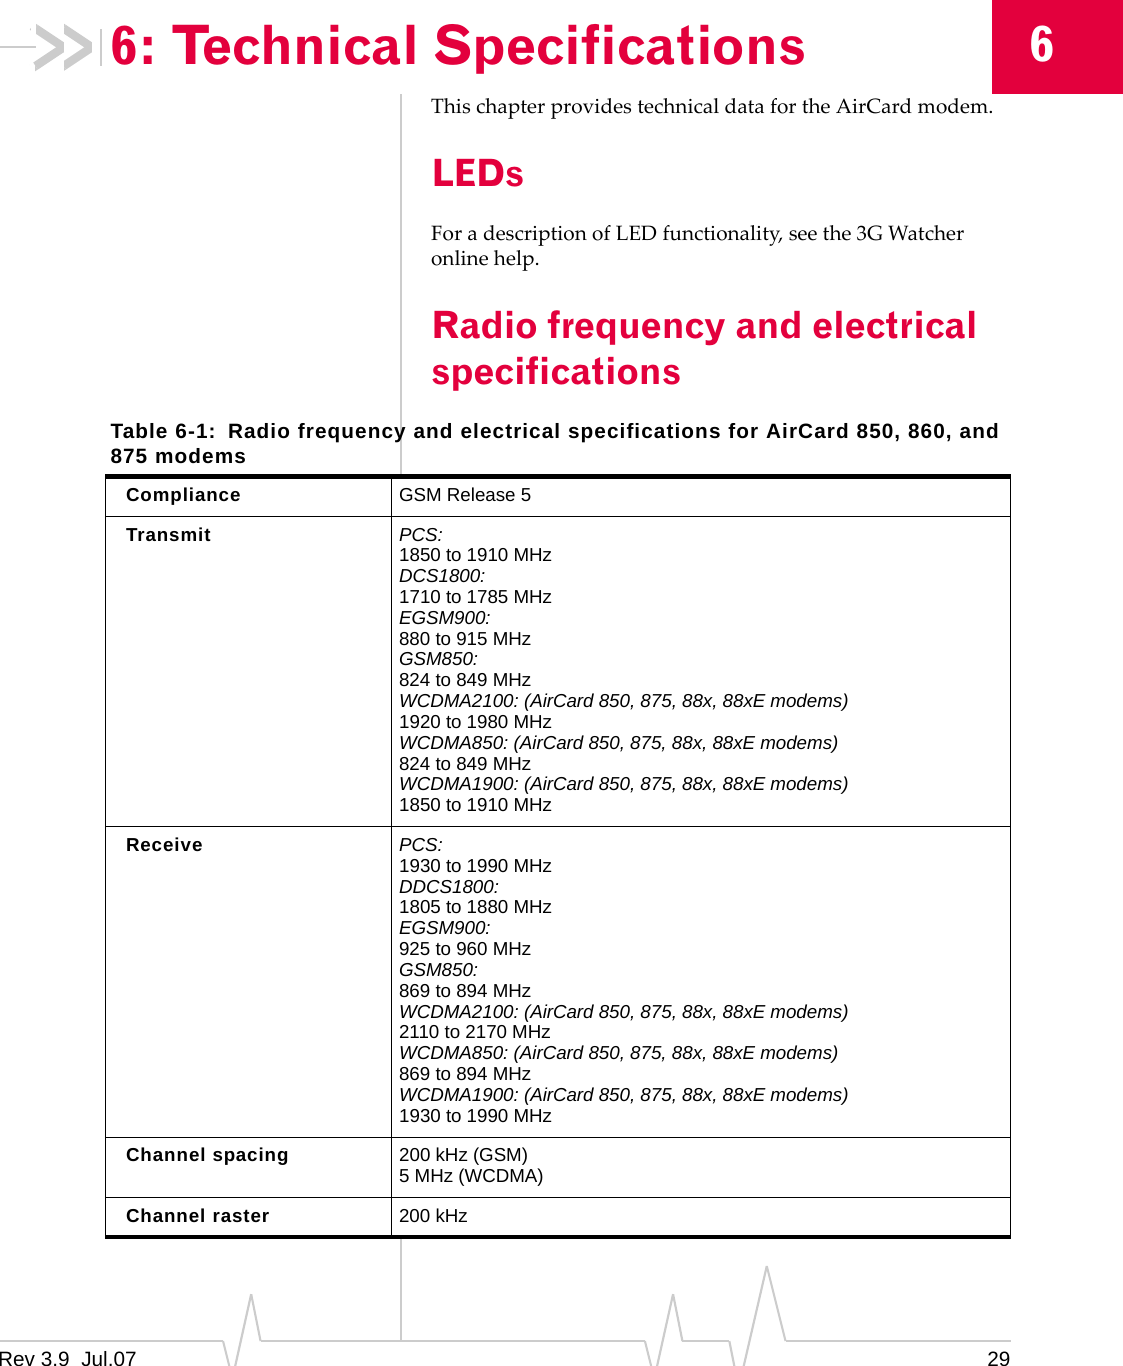 Rev 3.9  Jul.07  29 66: Technical Specifications This chapter provides technical data for the AirCard modem. LEDs For a description of LED functionality, see the 3G Watcher online help. Radio frequency and electrical specifications Table 6-1:  Radio frequency and electrical specifications for AirCard 850, 860, and 875 modems Compliance  GSM Release 5 Transmit  PCS: 1850 to 1910 MHz DCS1800: 1710 to 1785 MHz EGSM900: 880 to 915 MHz GSM850: 824 to 849 MHz WCDMA2100: (AirCard 850, 875, 88x, 88xE modems) 1920 to 1980 MHz WCDMA850: (AirCard 850, 875, 88x, 88xE modems) 824 to 849 MHz WCDMA1900: (AirCard 850, 875, 88x, 88xE modems) 1850 to 1910 MHz Receive  PCS: 1930 to 1990 MHz DDCS1800: 1805 to 1880 MHz EGSM900: 925 to 960 MHz GSM850: 869 to 894 MHz WCDMA2100: (AirCard 850, 875, 88x, 88xE modems) 2110 to 2170 MHz WCDMA850: (AirCard 850, 875, 88x, 88xE modems) 869 to 894 MHz WCDMA1900: (AirCard 850, 875, 88x, 88xE modems) 1930 to 1990 MHz Channel spacing  200 kHz (GSM) 5 MHz (WCDMA) Channel raster  200 kHz 